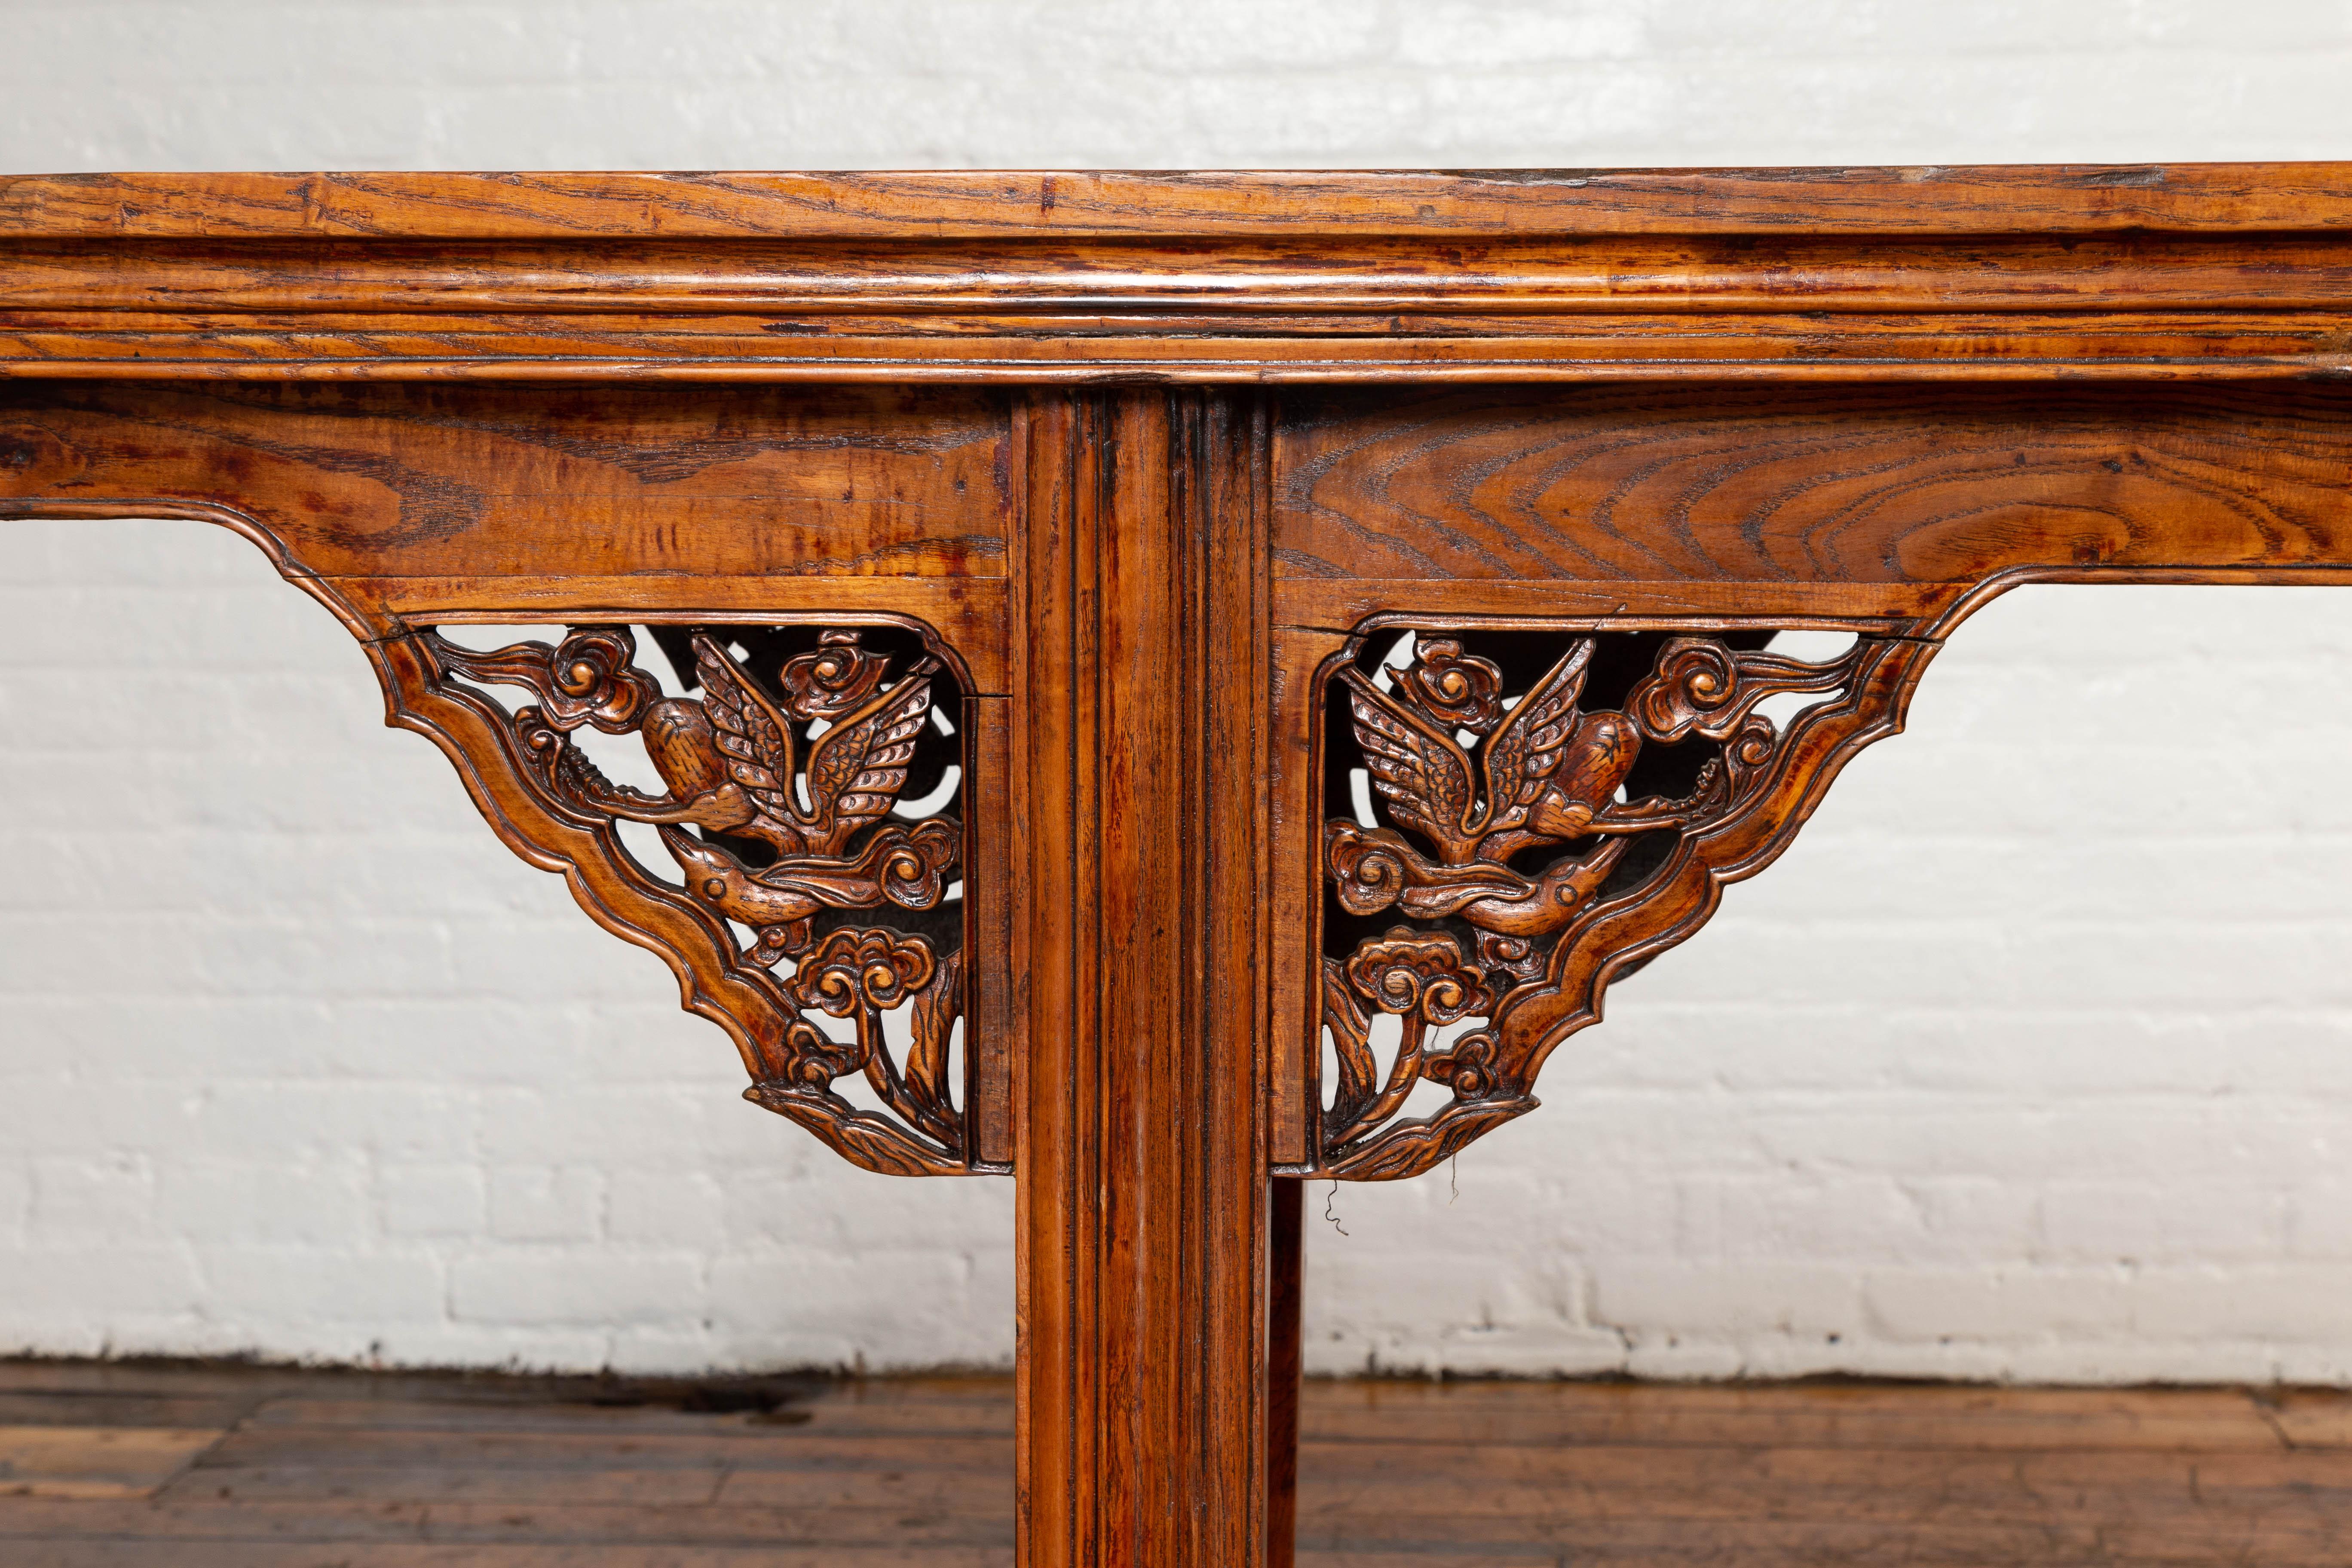 Wood Chinese Ming Style Altar Console Table with Bird-Carved Spandrels and Fretwork